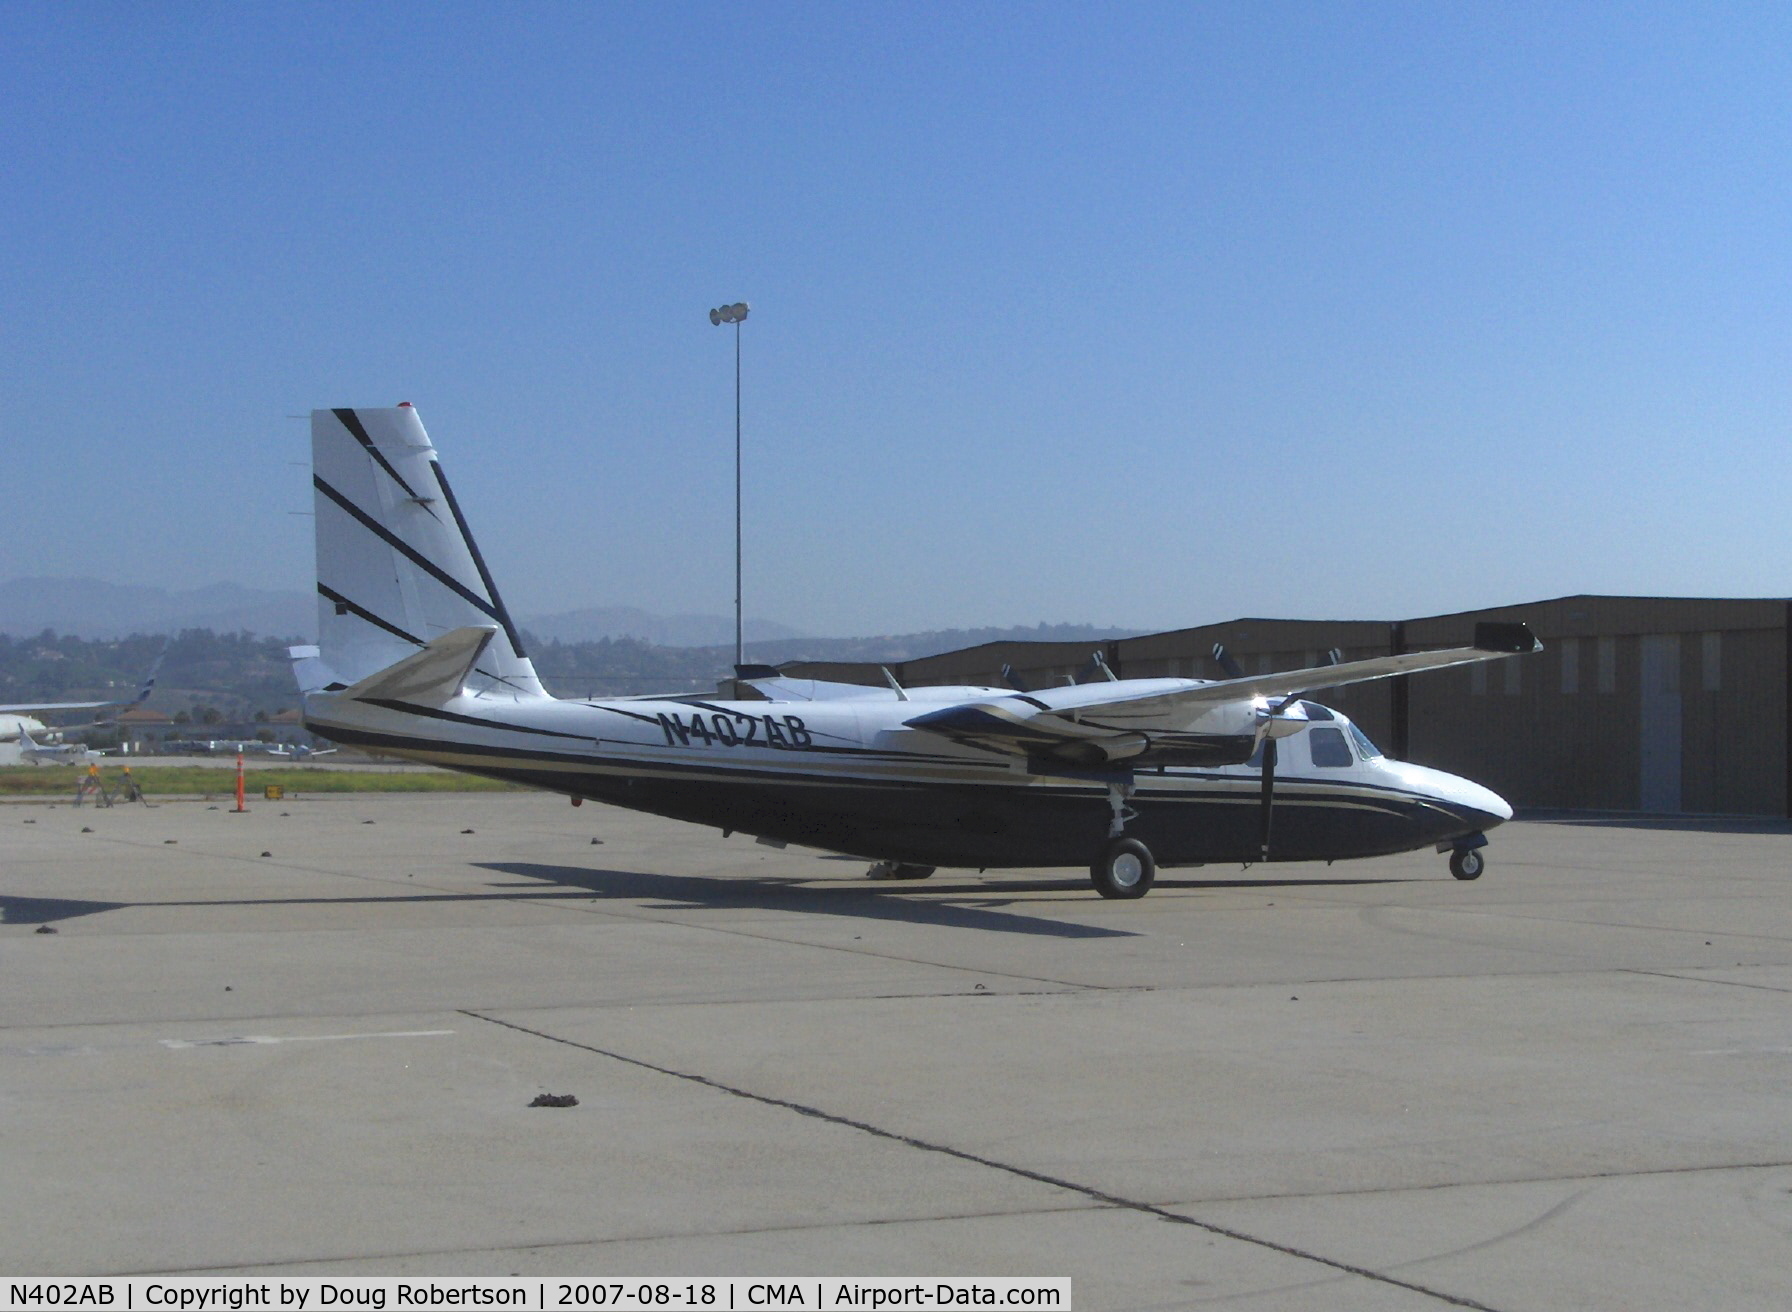 N402AB, Rockwell International 690C C/N 11659, 1985 Rockwell TURBO COMMANDER 690C, two Airesearch TPE331--5&6 700 shp turboprops